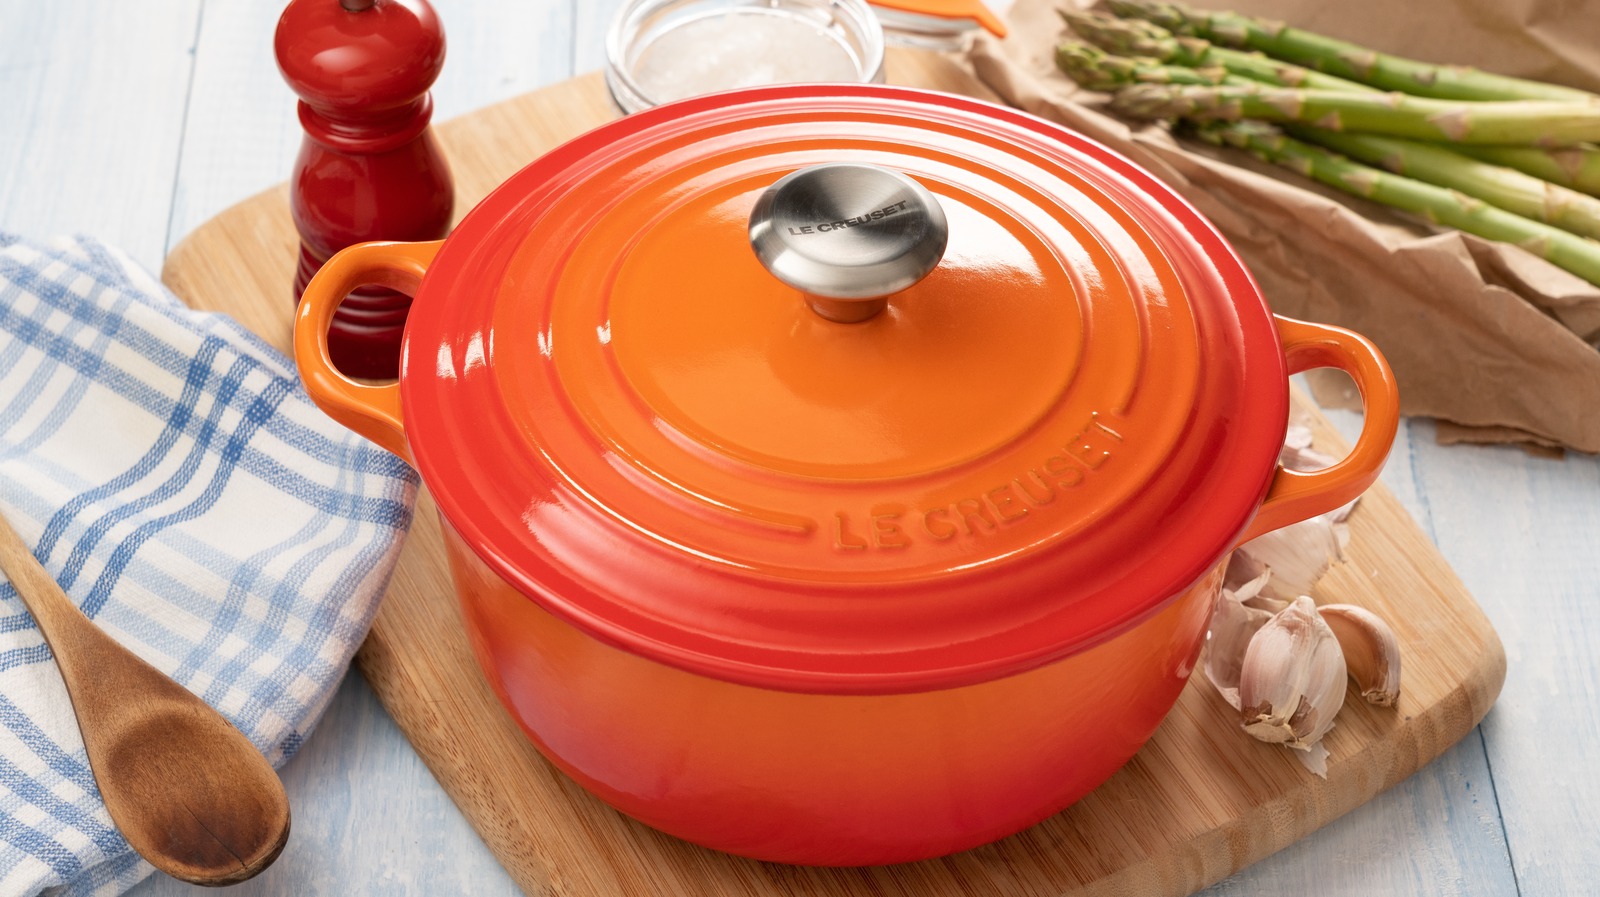 https://www.thedailymeal.com/img/gallery/you-may-want-to-avoid-putting-your-dutch-oven-in-the-dishwasher/l-intro-1675951652.jpg